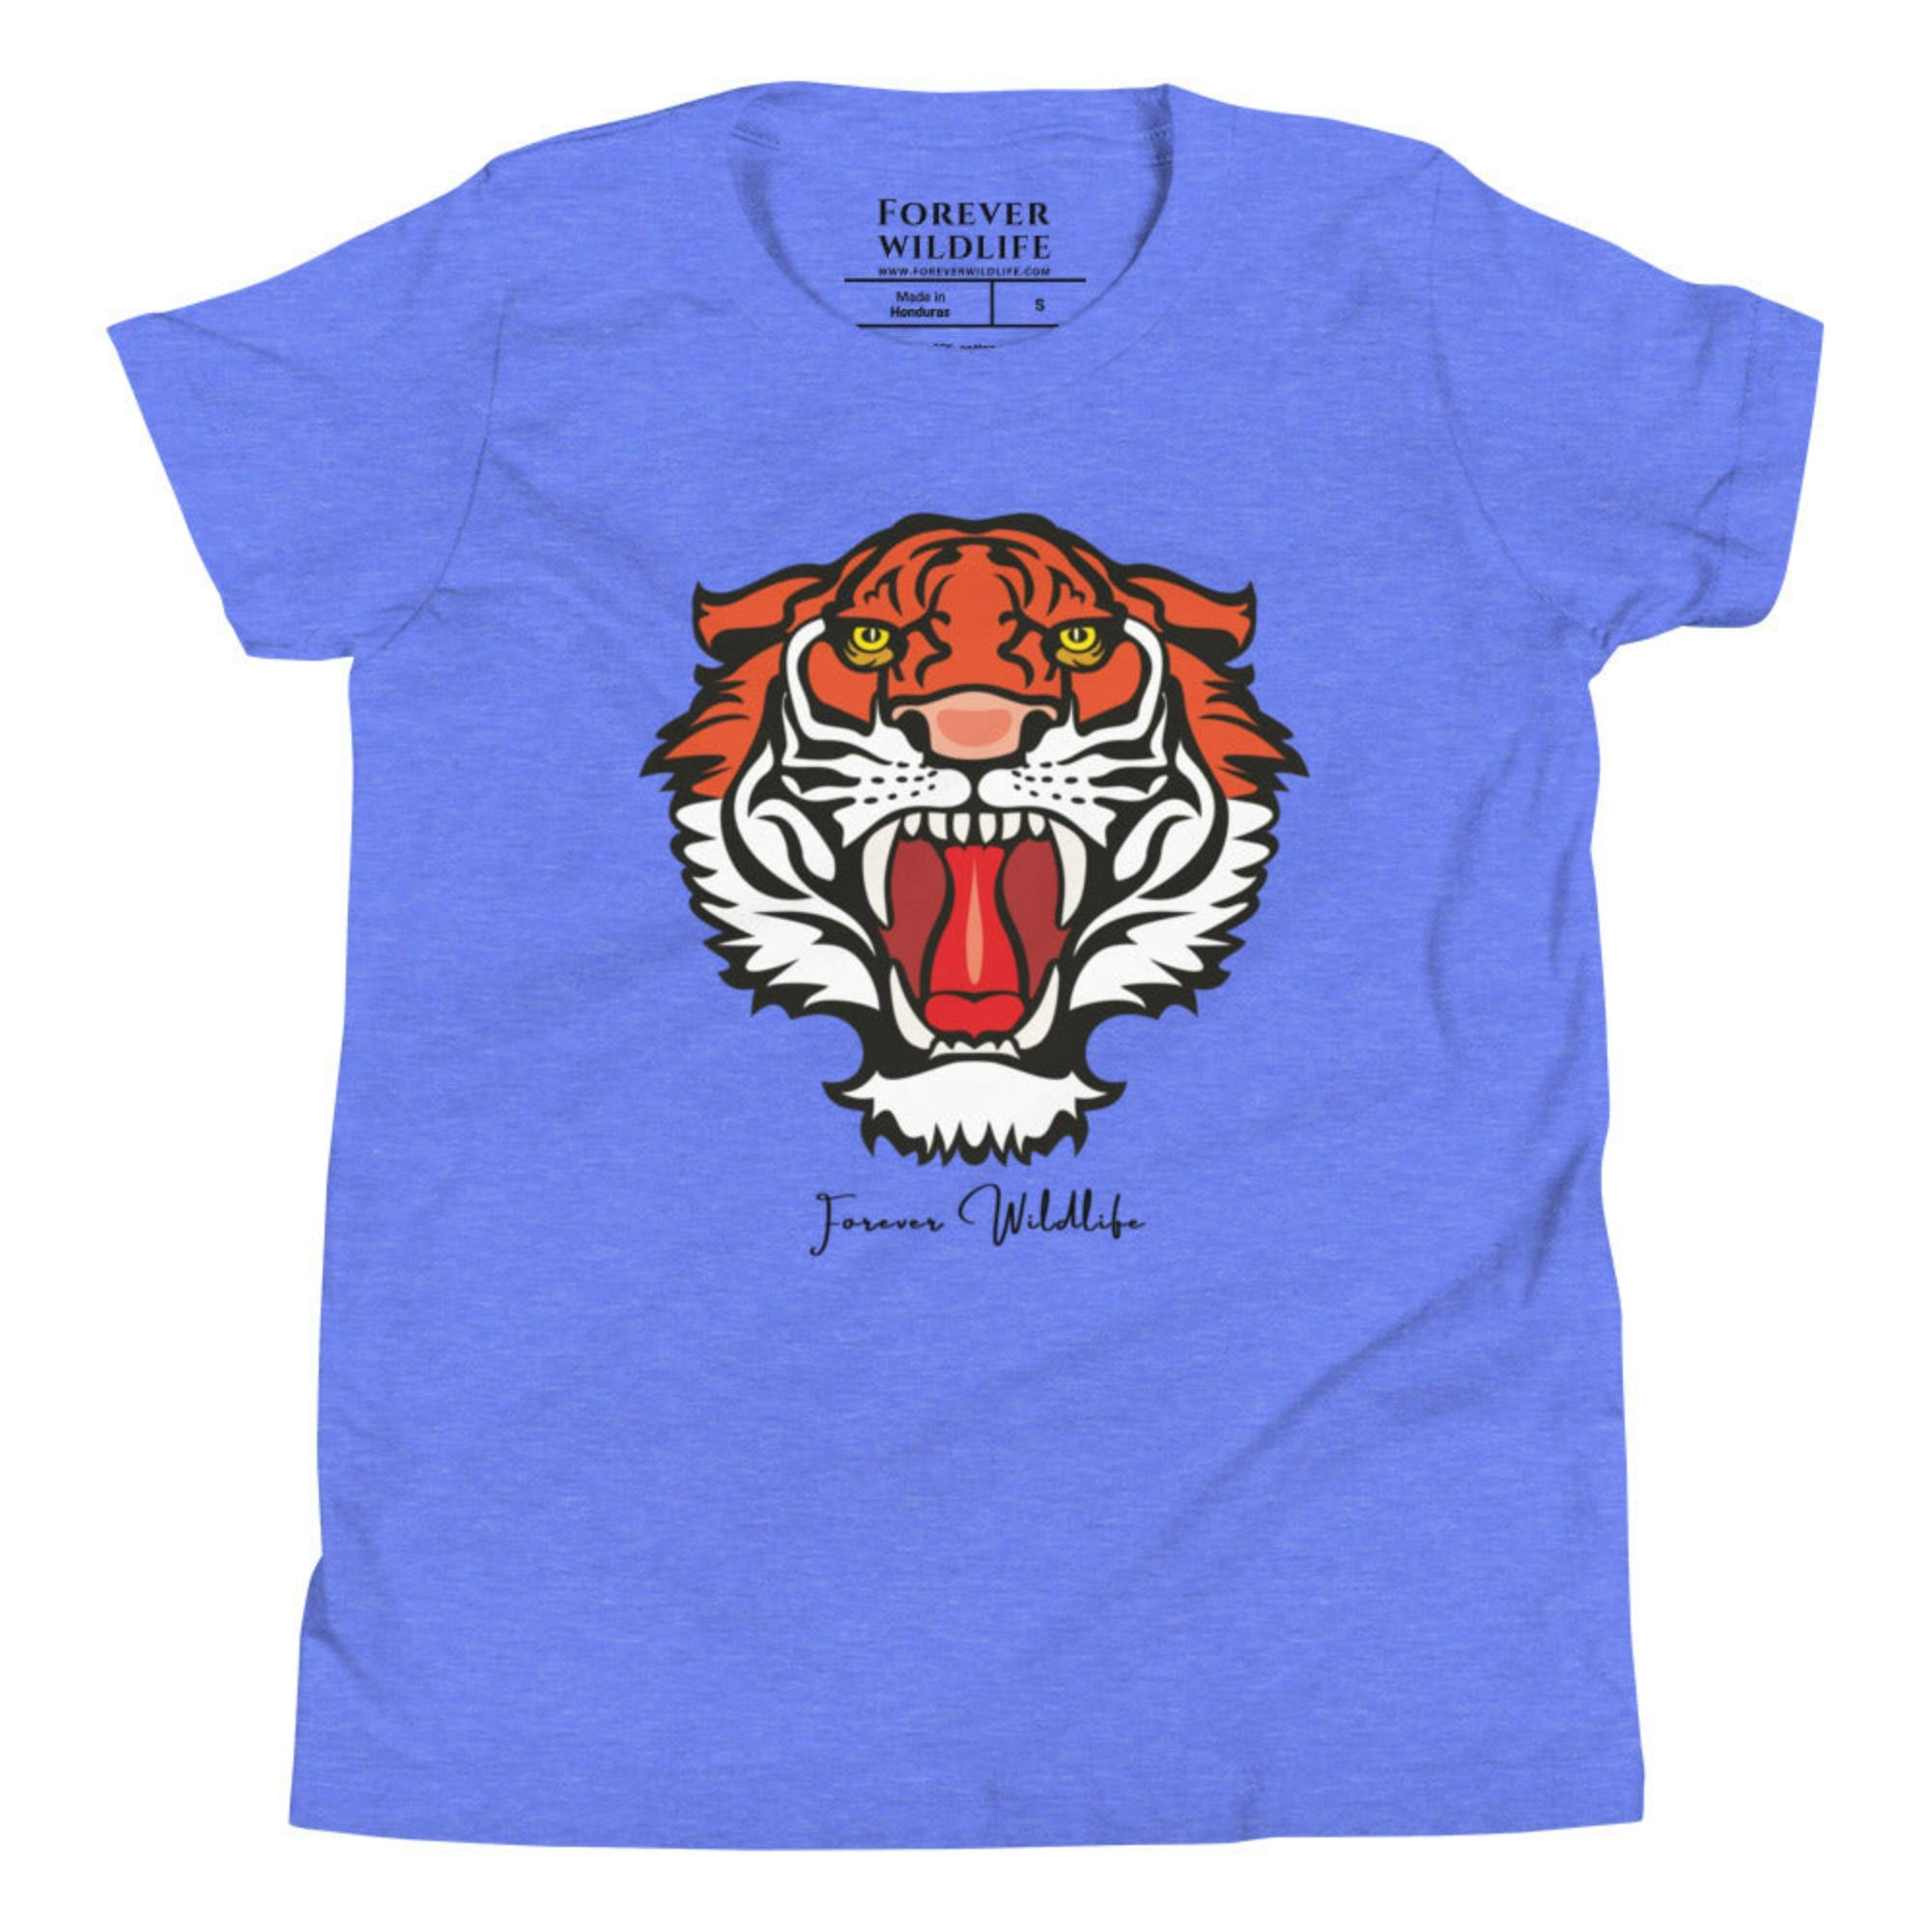 Columbia Blue Heather Youth T-Shirt with Tiger graphic as part of Wildlife T Shirts, Wildlife Clothing & Apparel by Forever Wildlife